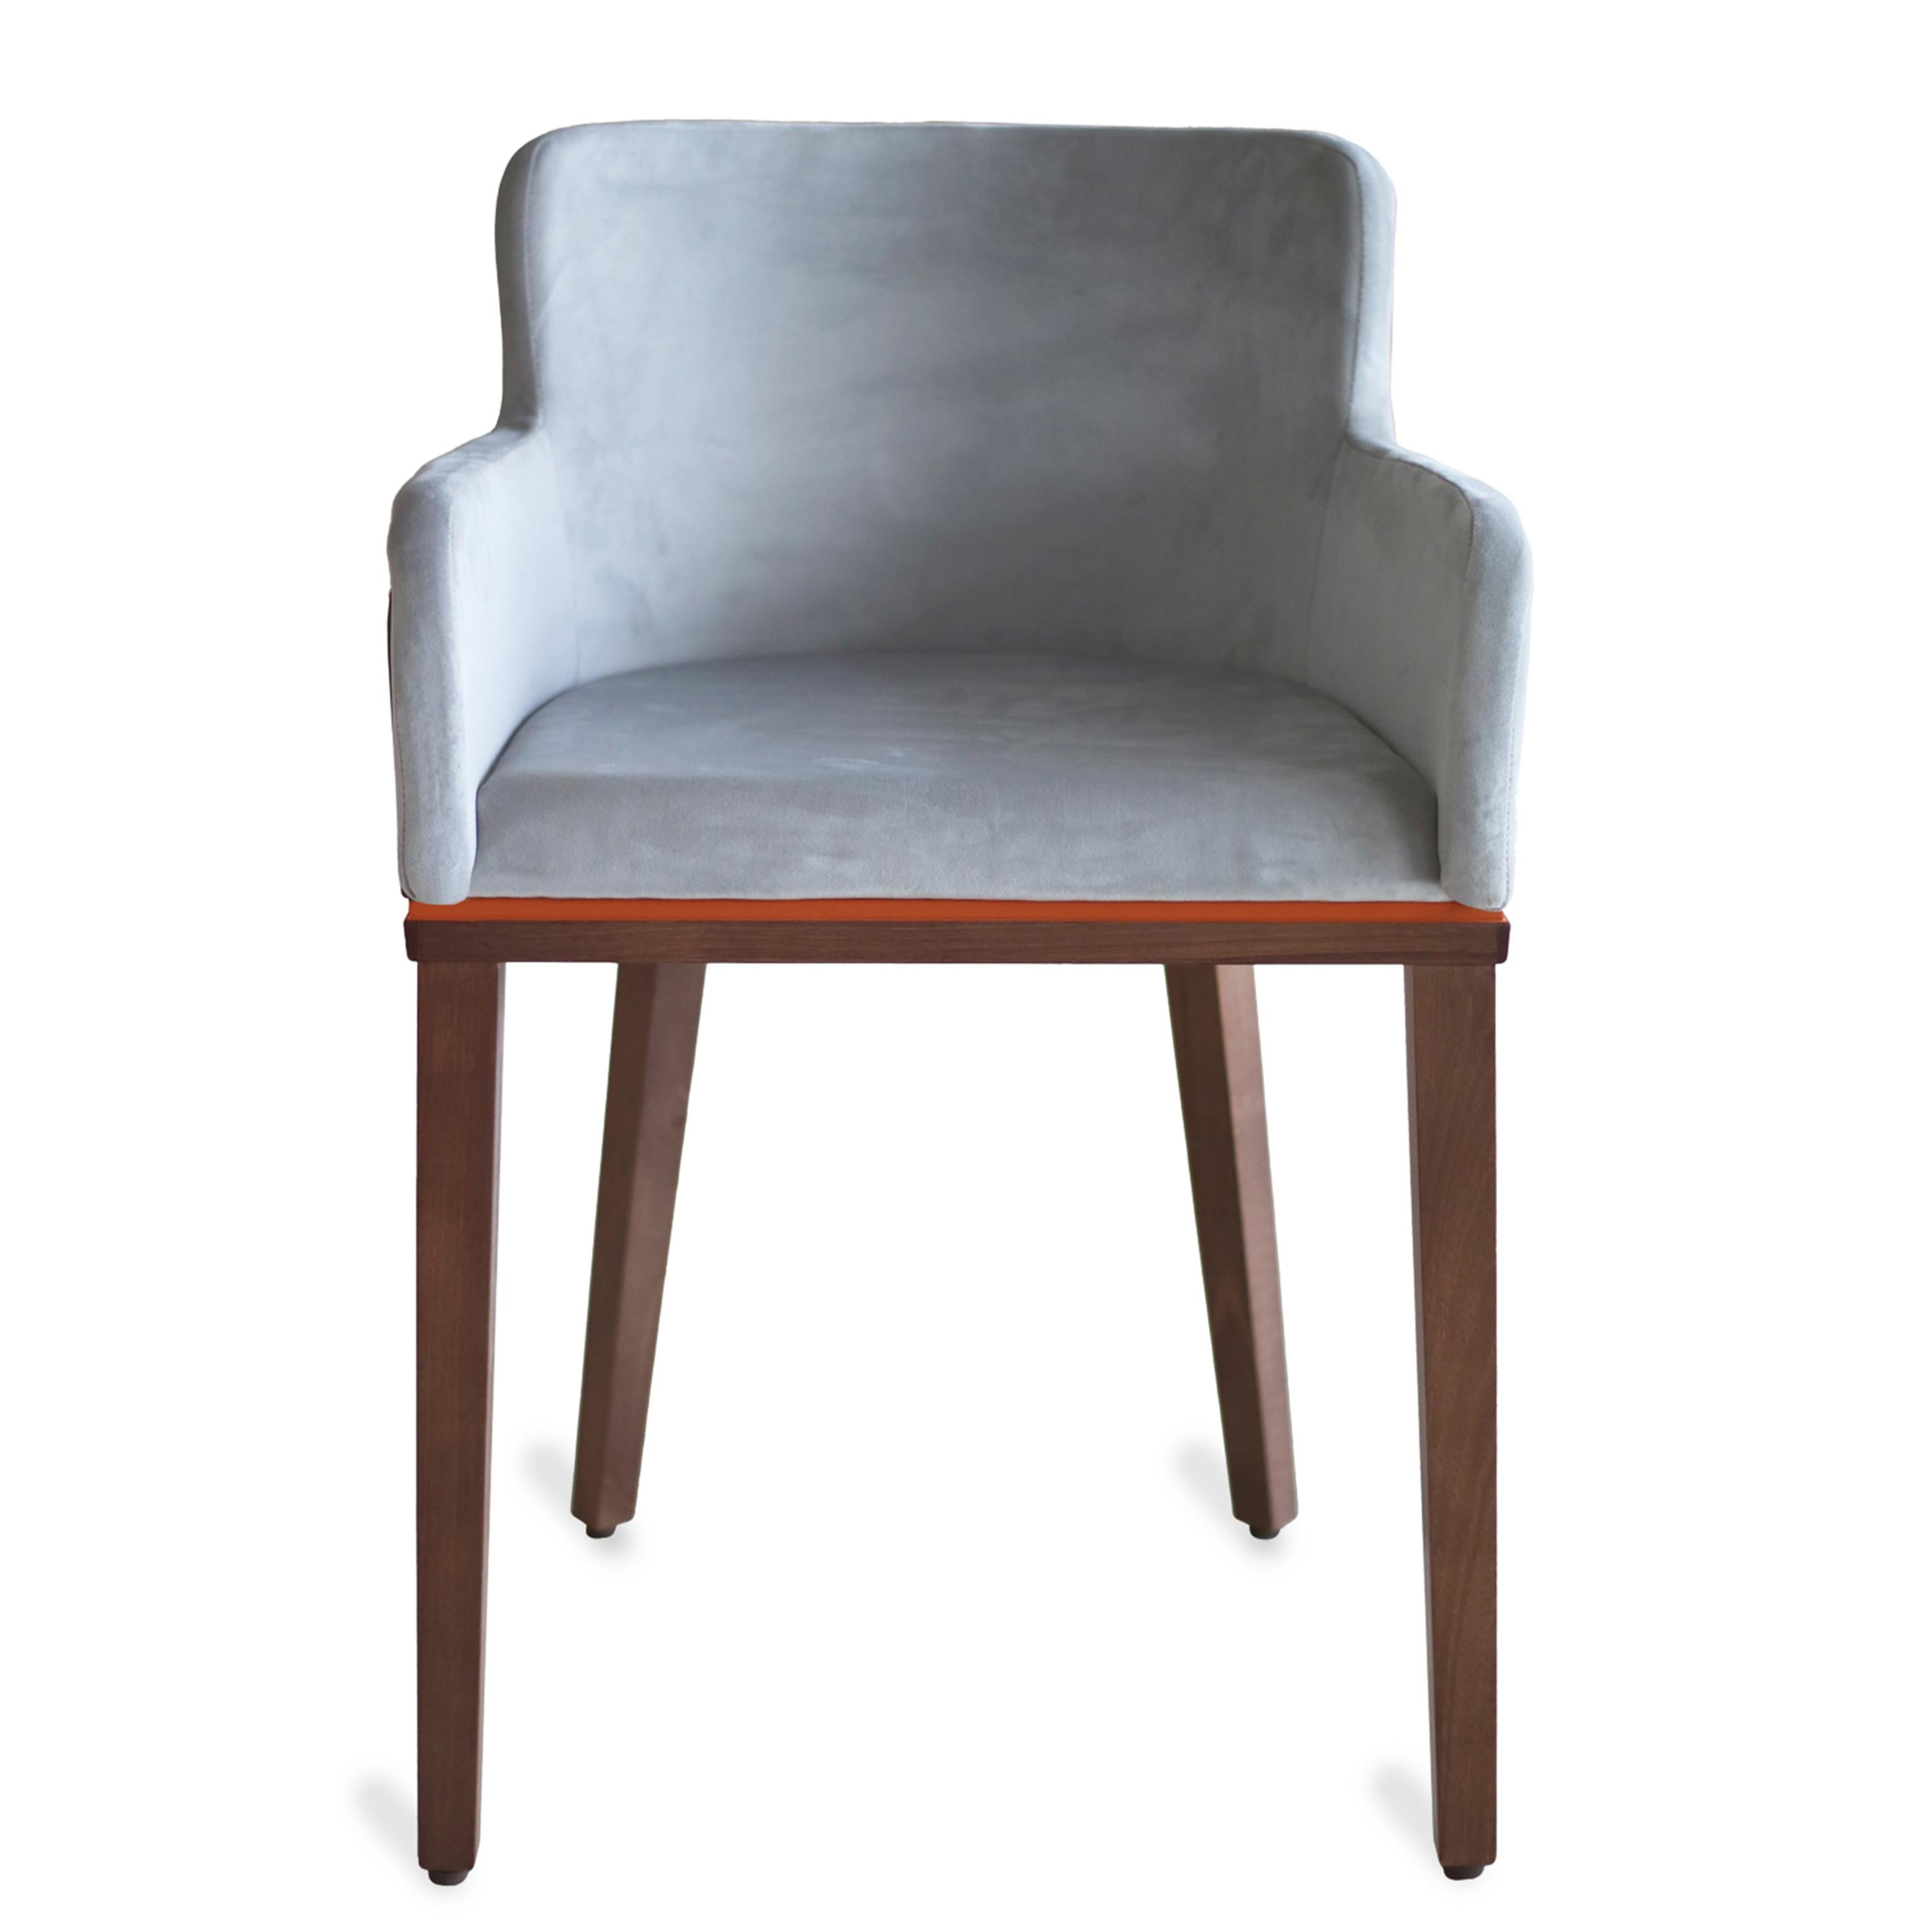 This dining chair's unique feature lies in the upholstery design which flows beyond the seat of the dining chair. The chair's structure is made using walnut with orange detailing just below the seat. The seat and back are upholstered in soft velvet